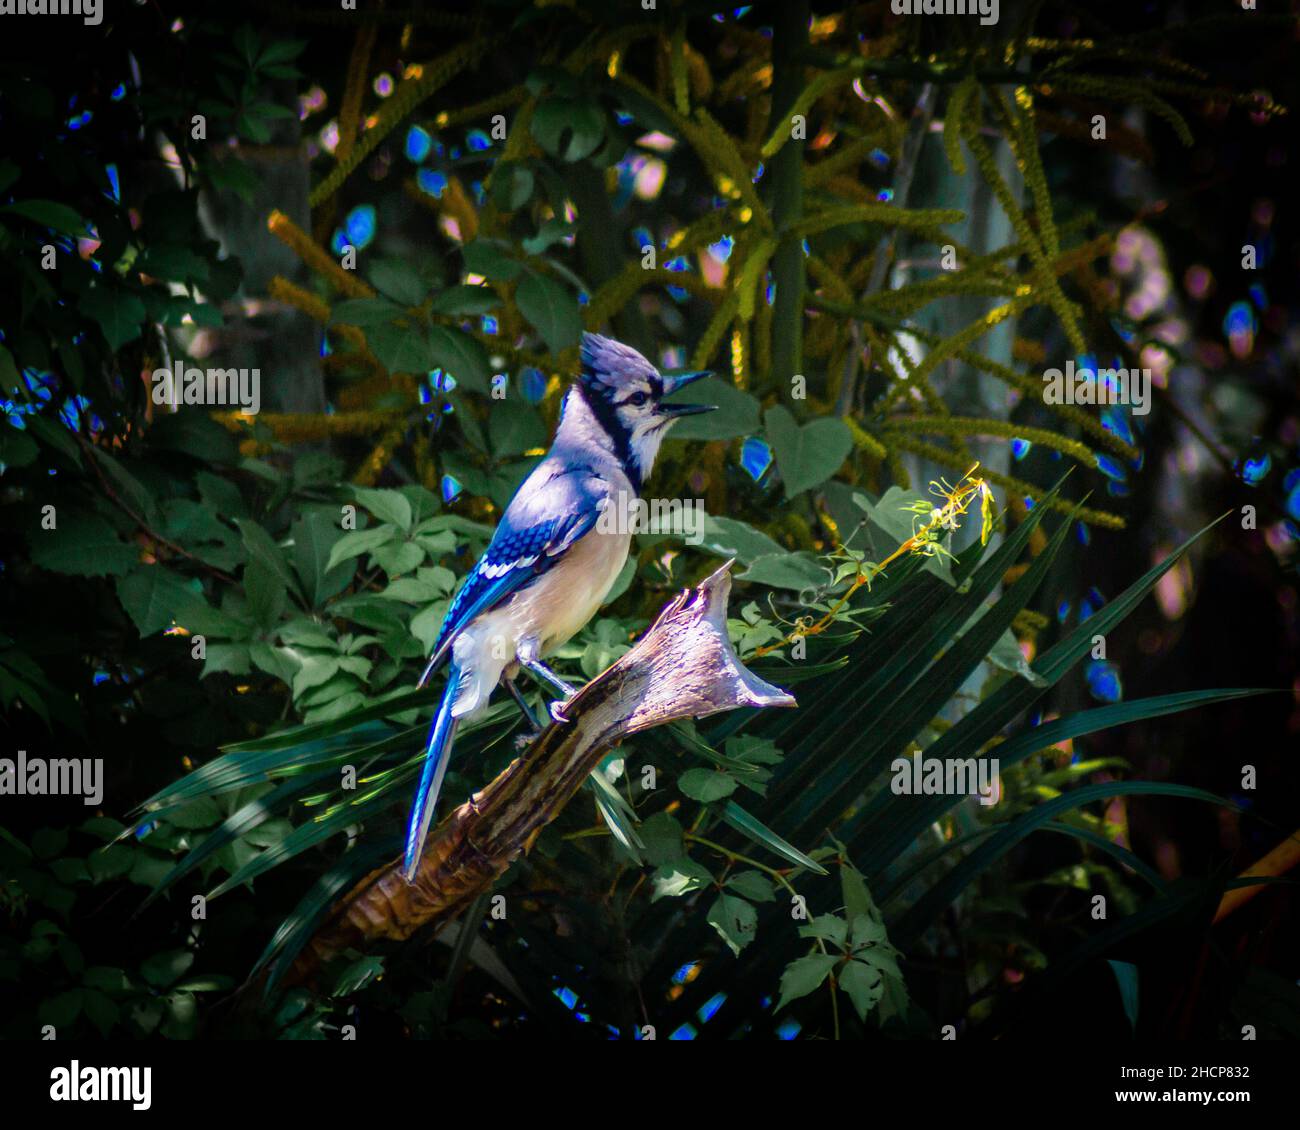 Blue jay bird on a branch of a tree Stock Photo